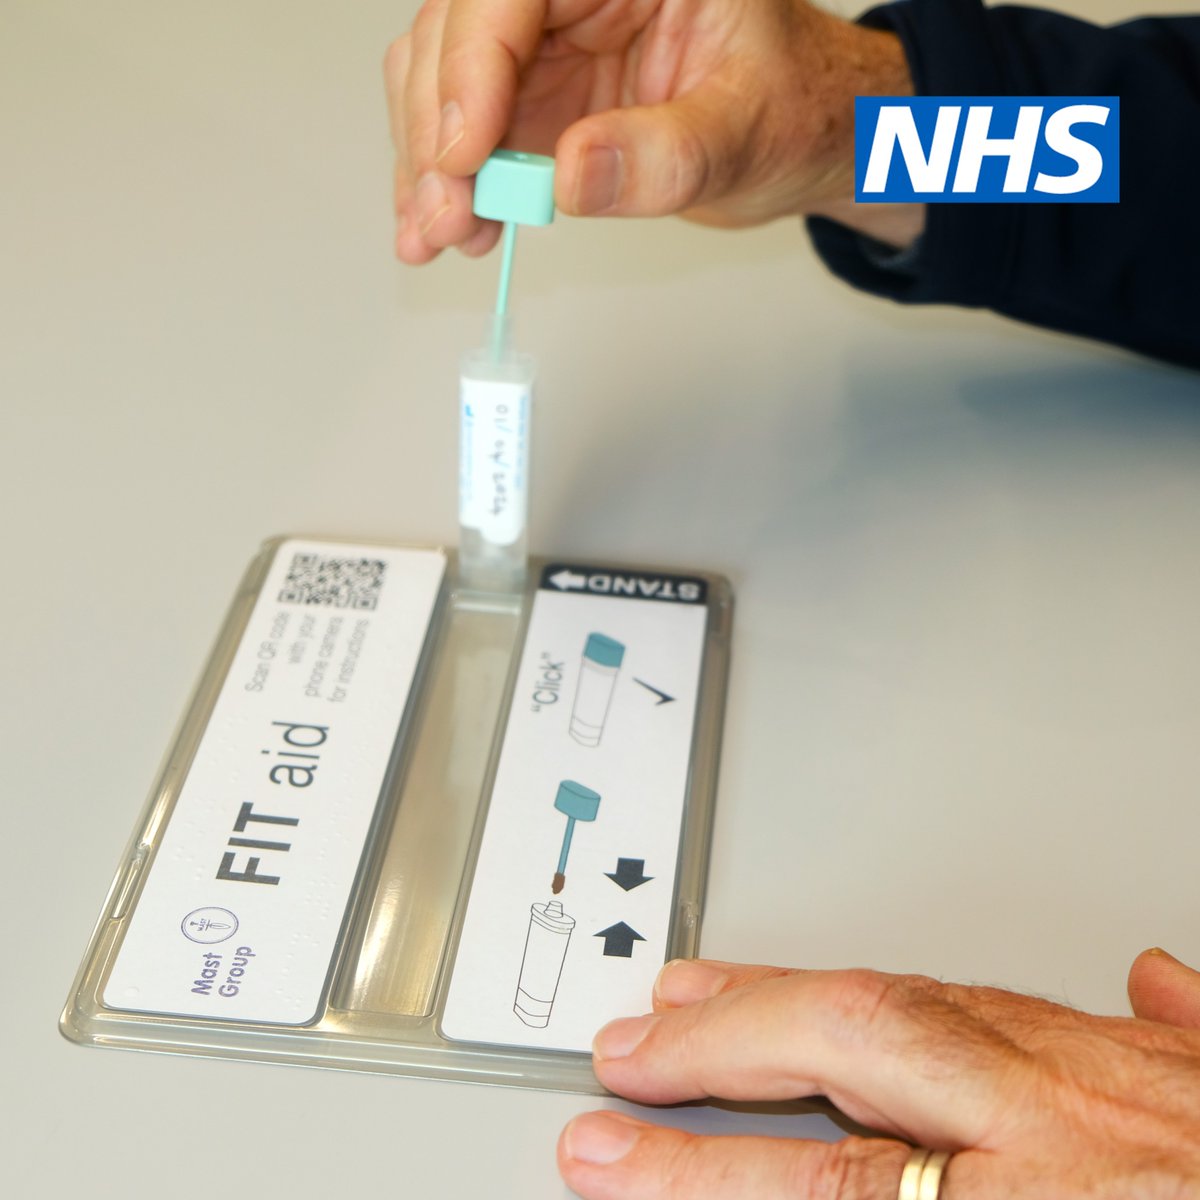 Thousands of people with sight loss in England could find it easier to participate in life-saving bowel cancer screening thanks to a new pilot. Find out more about how we’re continuing to tackle health inequalities for the benefit of all patients. england.nhs.uk/2024/05/nhs-la….